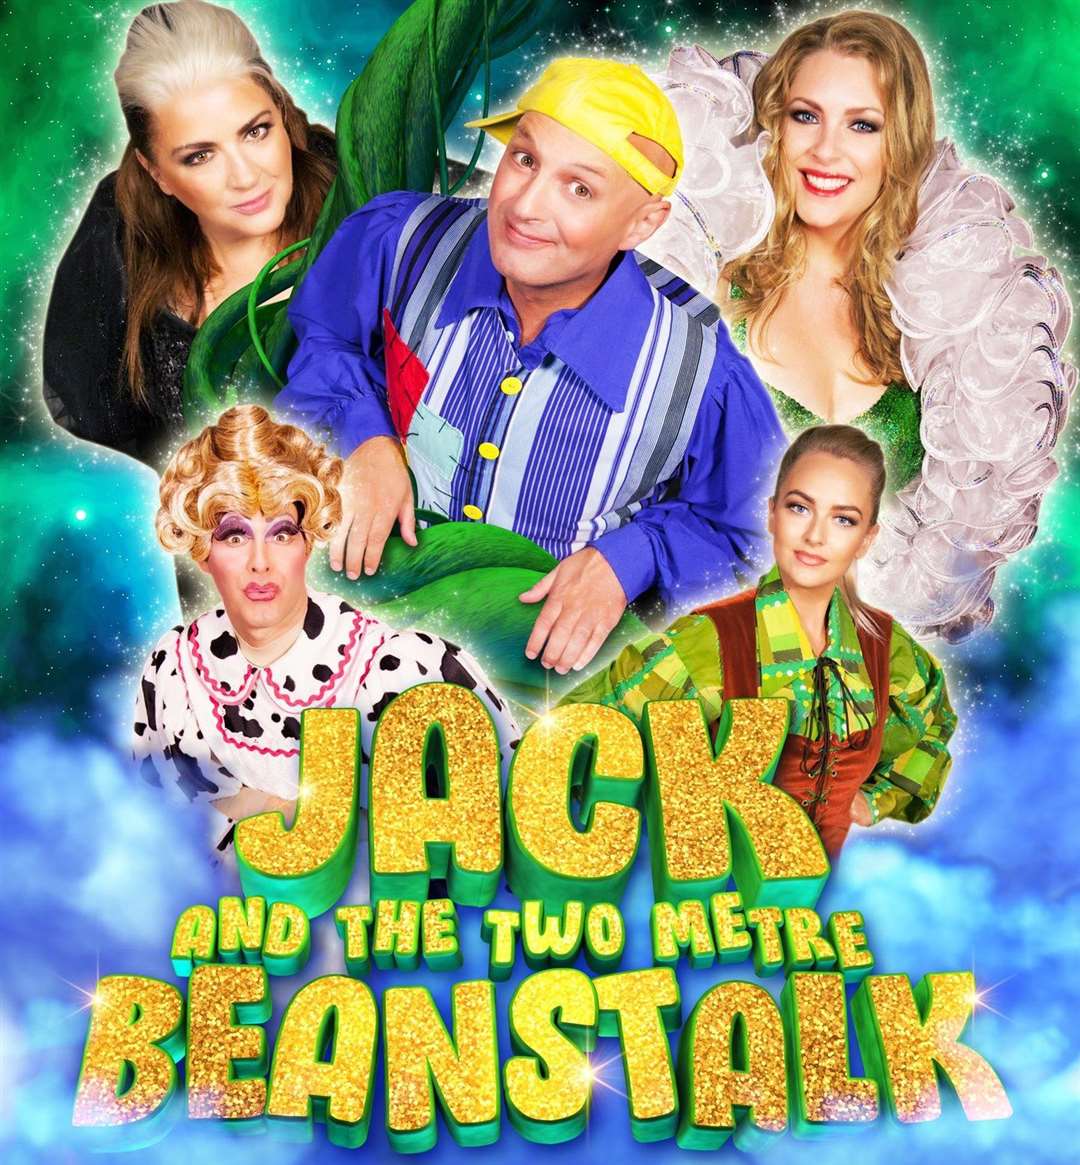 Jack and the Beanstalk will go ahead at The Stag